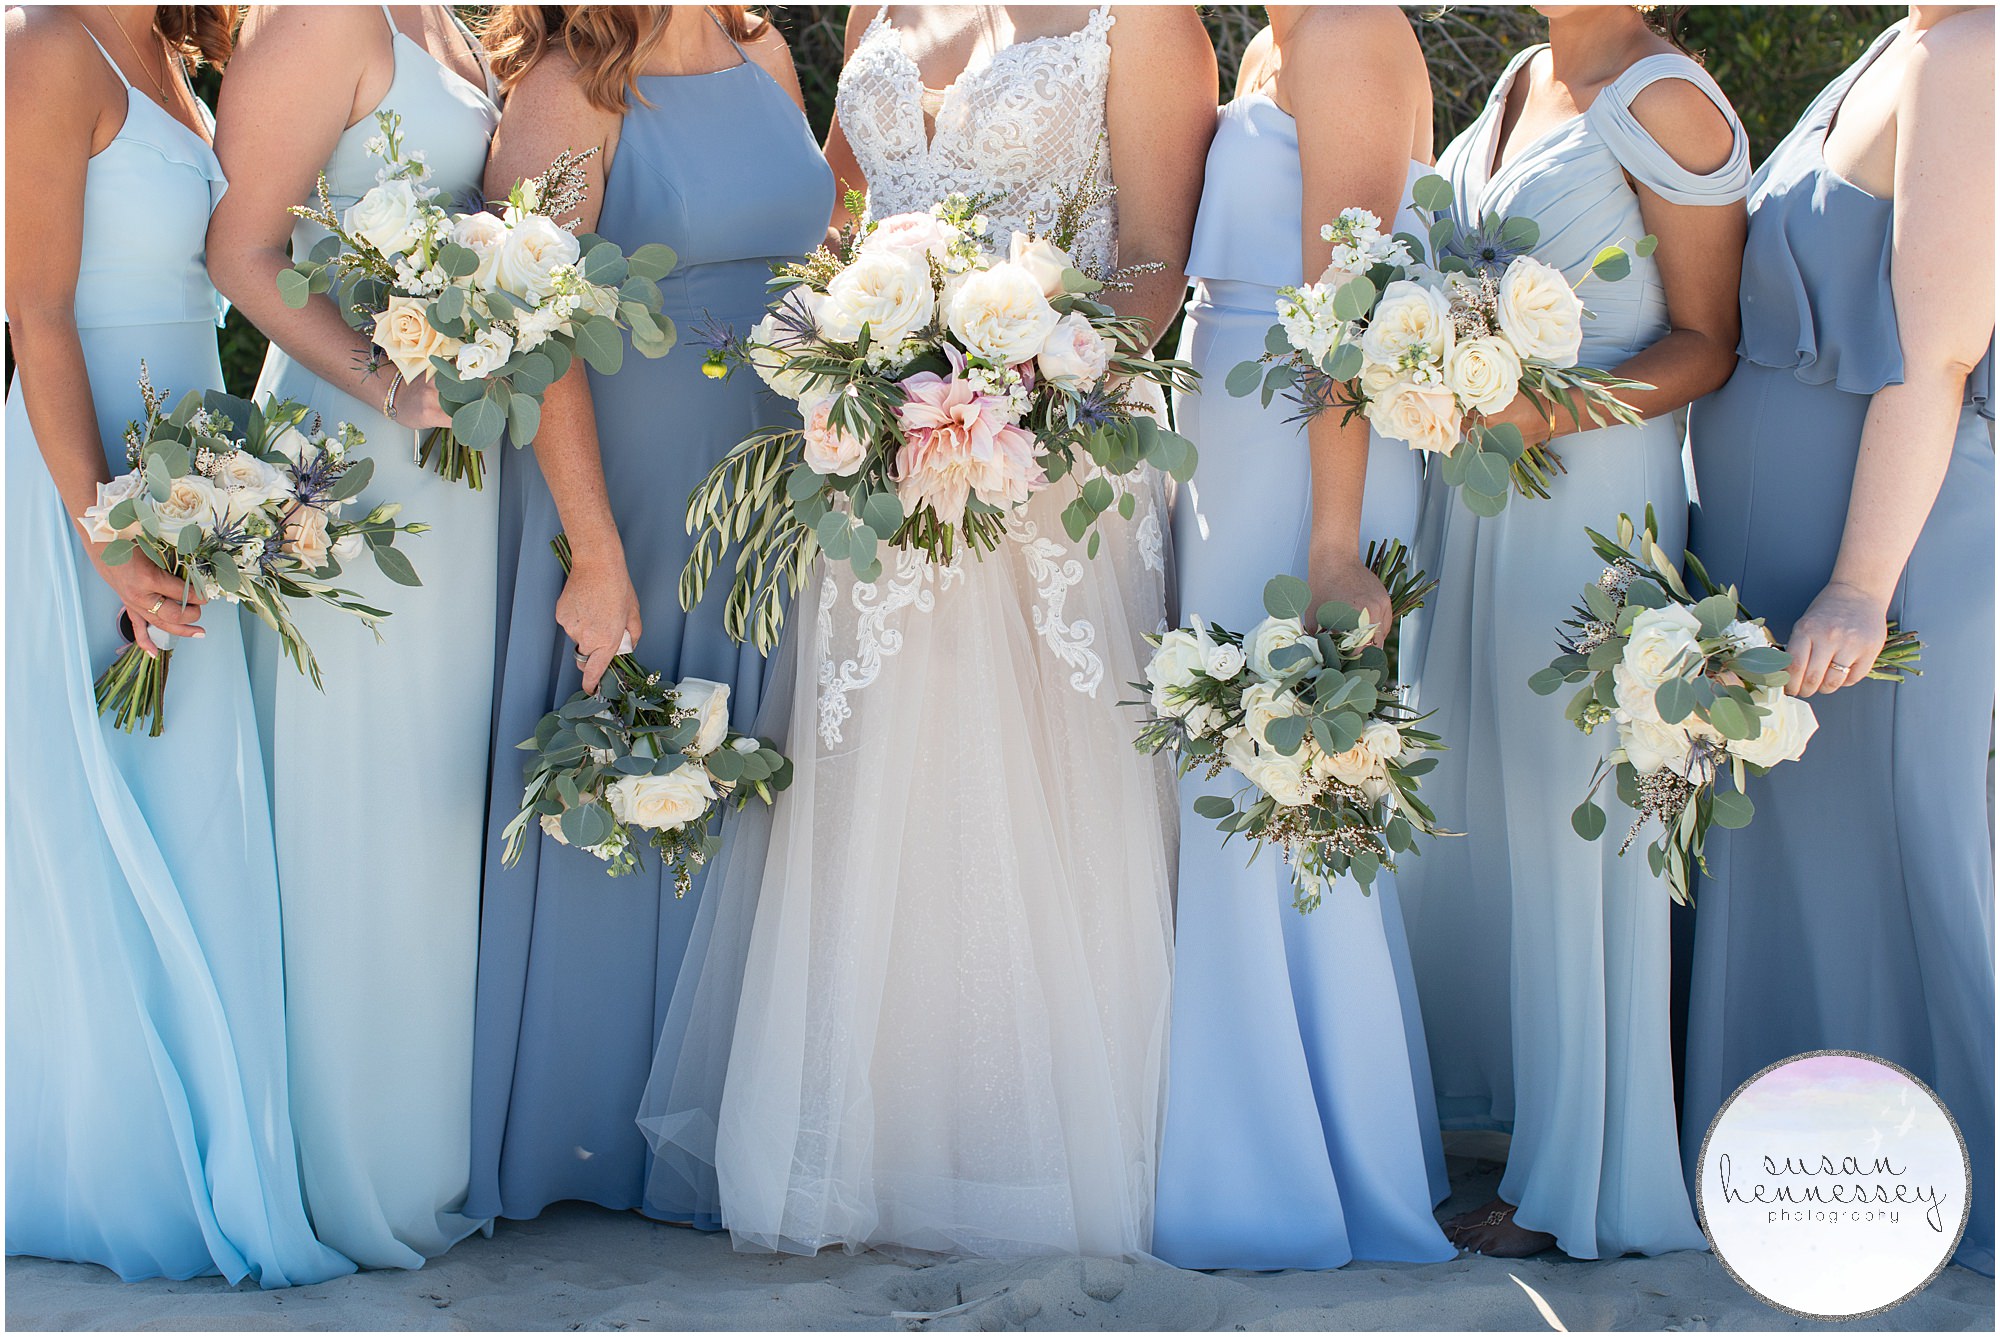 Susan Hennessey Photography Best of 2020 Weddings - Bridesmaids in various shades of blue at ICONA Diamond Beach wedding